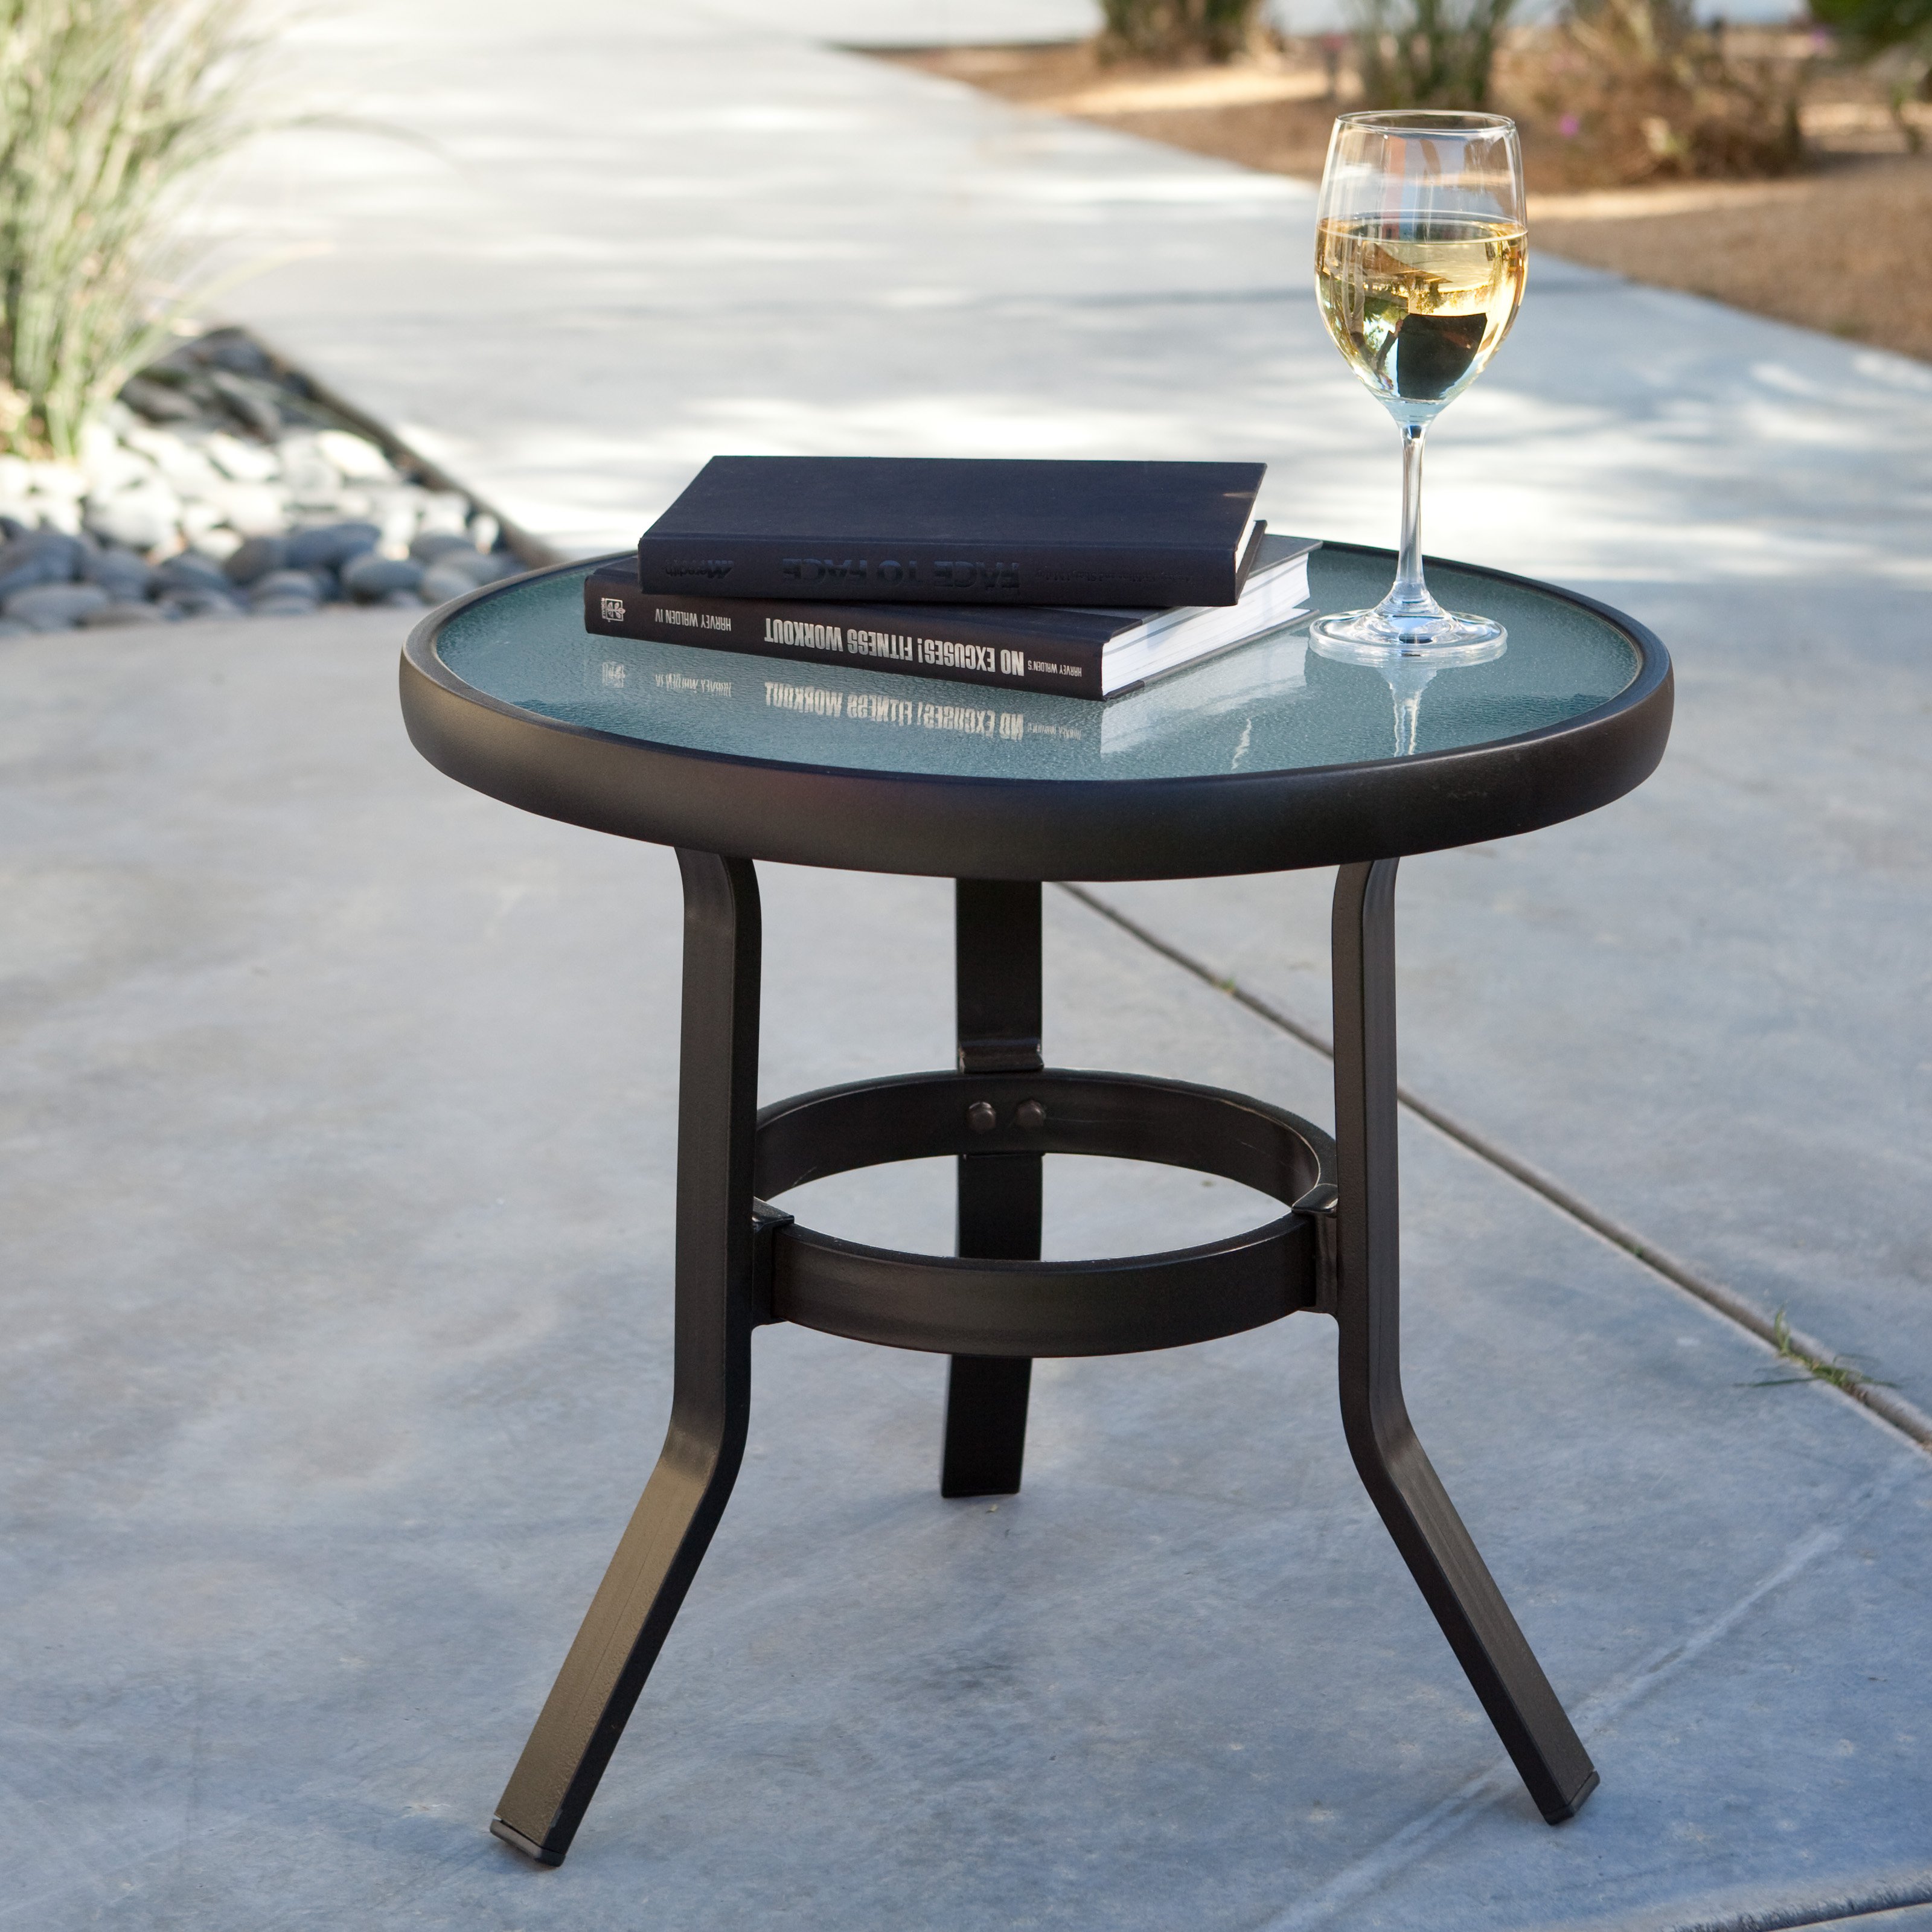 stylish outdoor accent table with results for quotoutdoor side tables patio plastic small square pedestal tall kitchen chairs round leaf ashley furniture company sun lounge